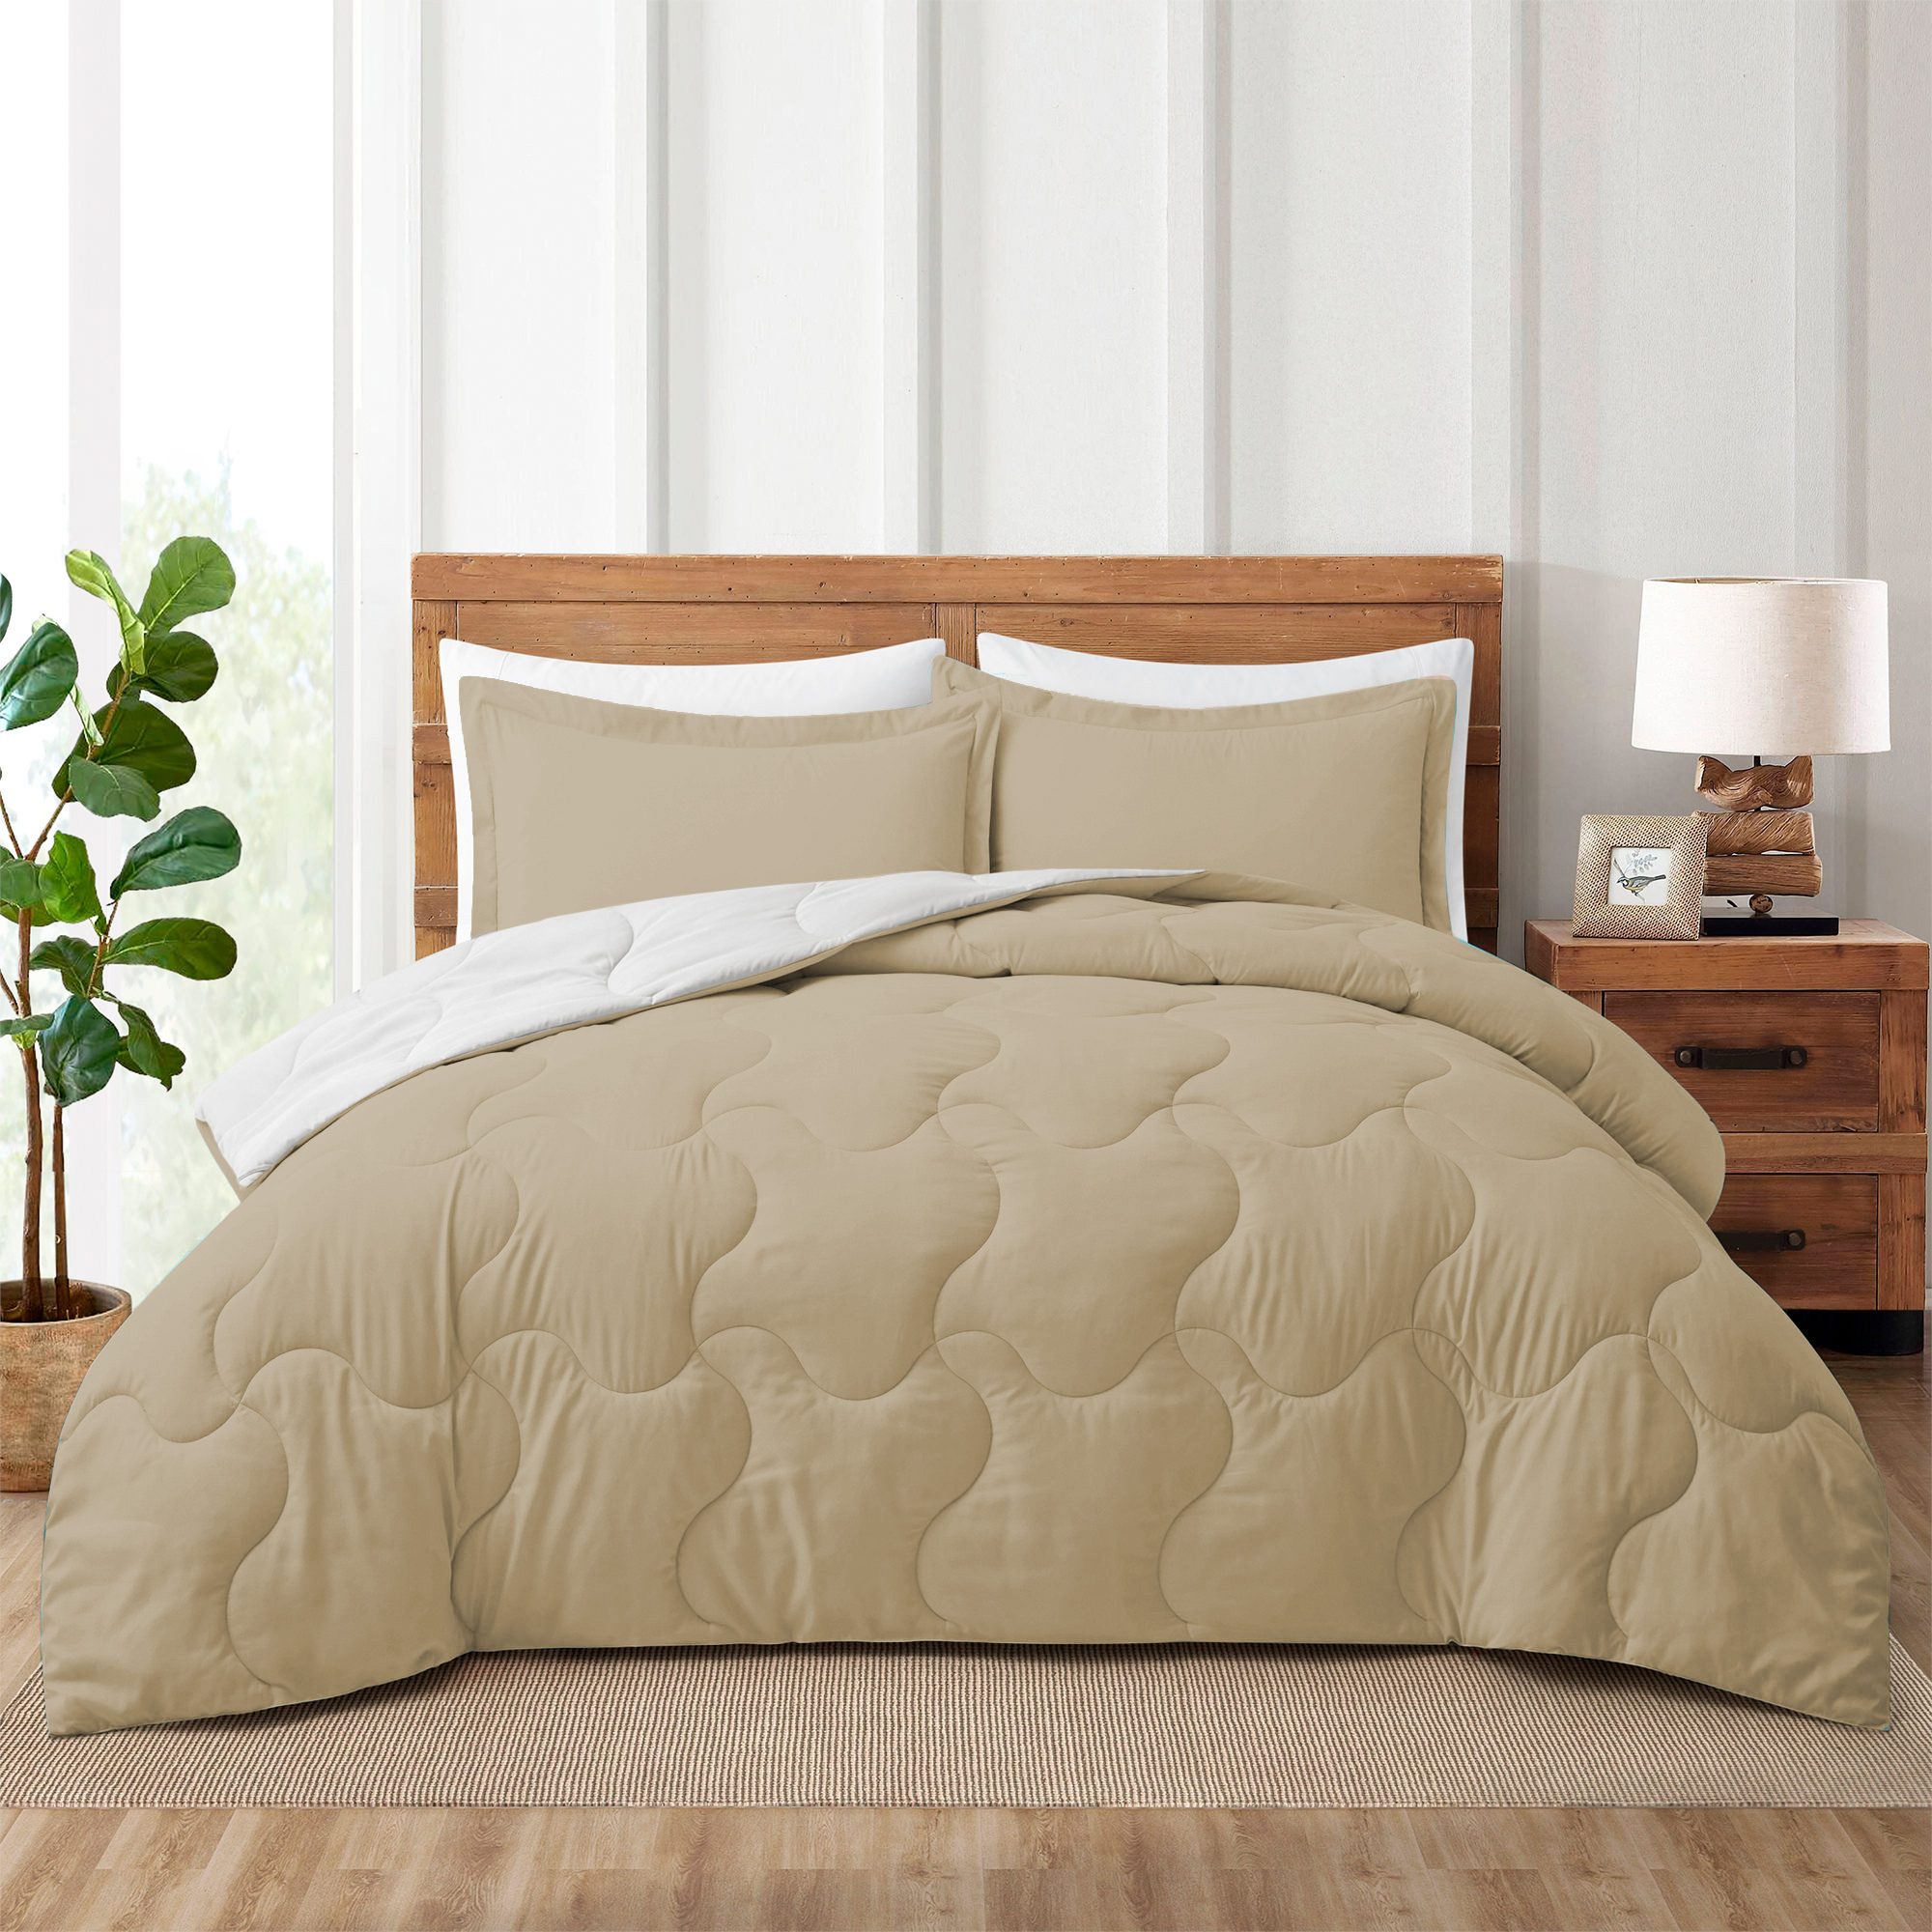 Luxury Reversible Down Alternative Machine Washable Comforter Set With Shams - Full/Queen Size